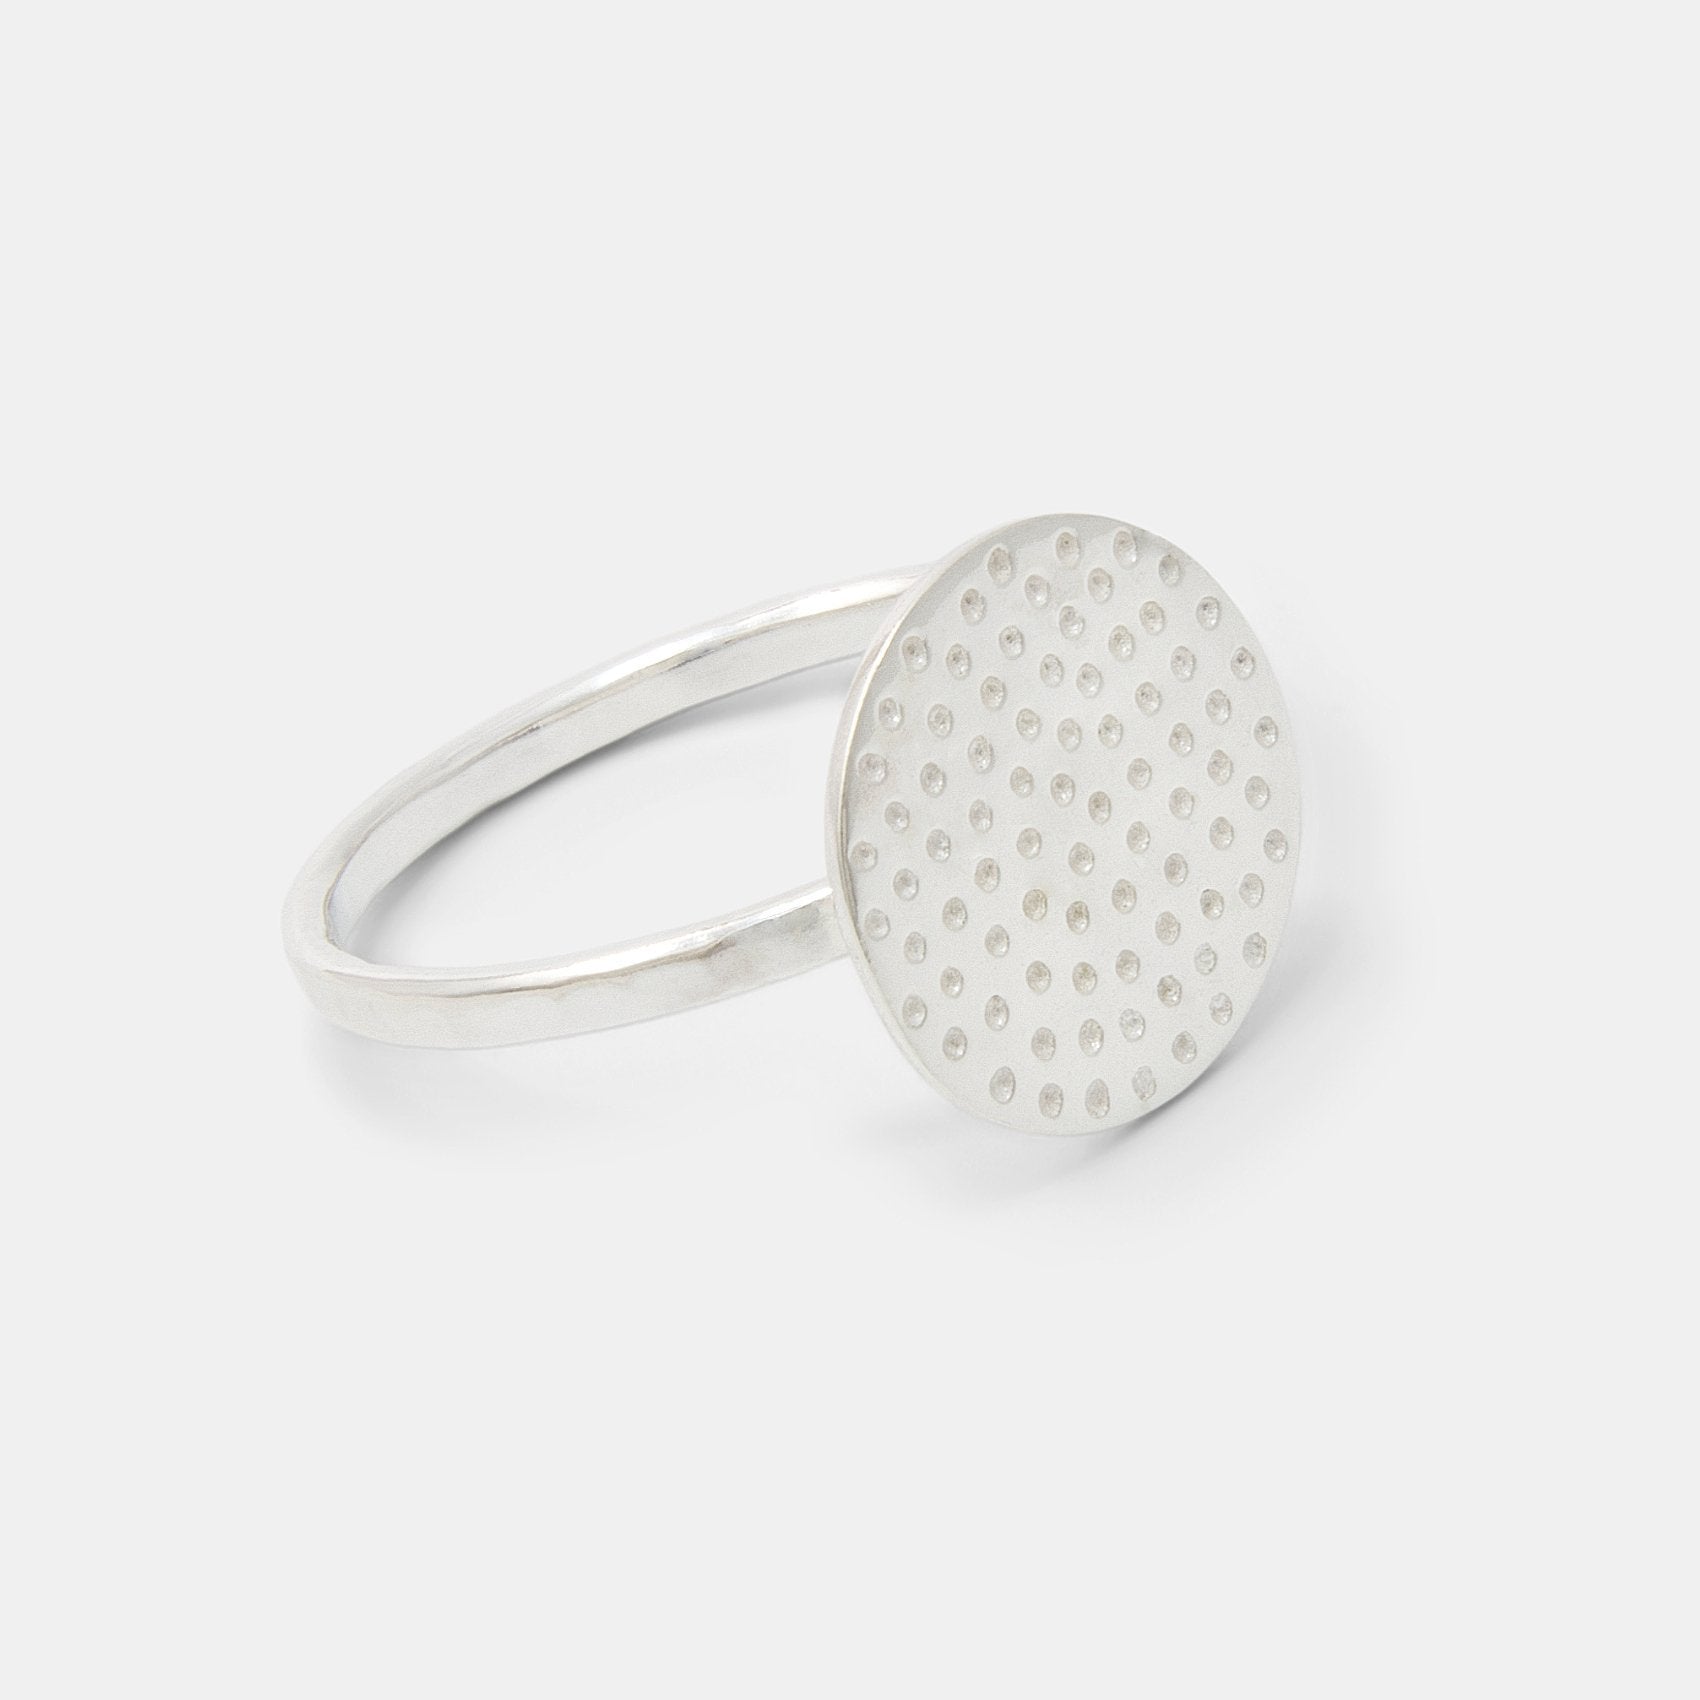 Dots texture silver cocktail ring - Simone Walsh Jewellery Australia